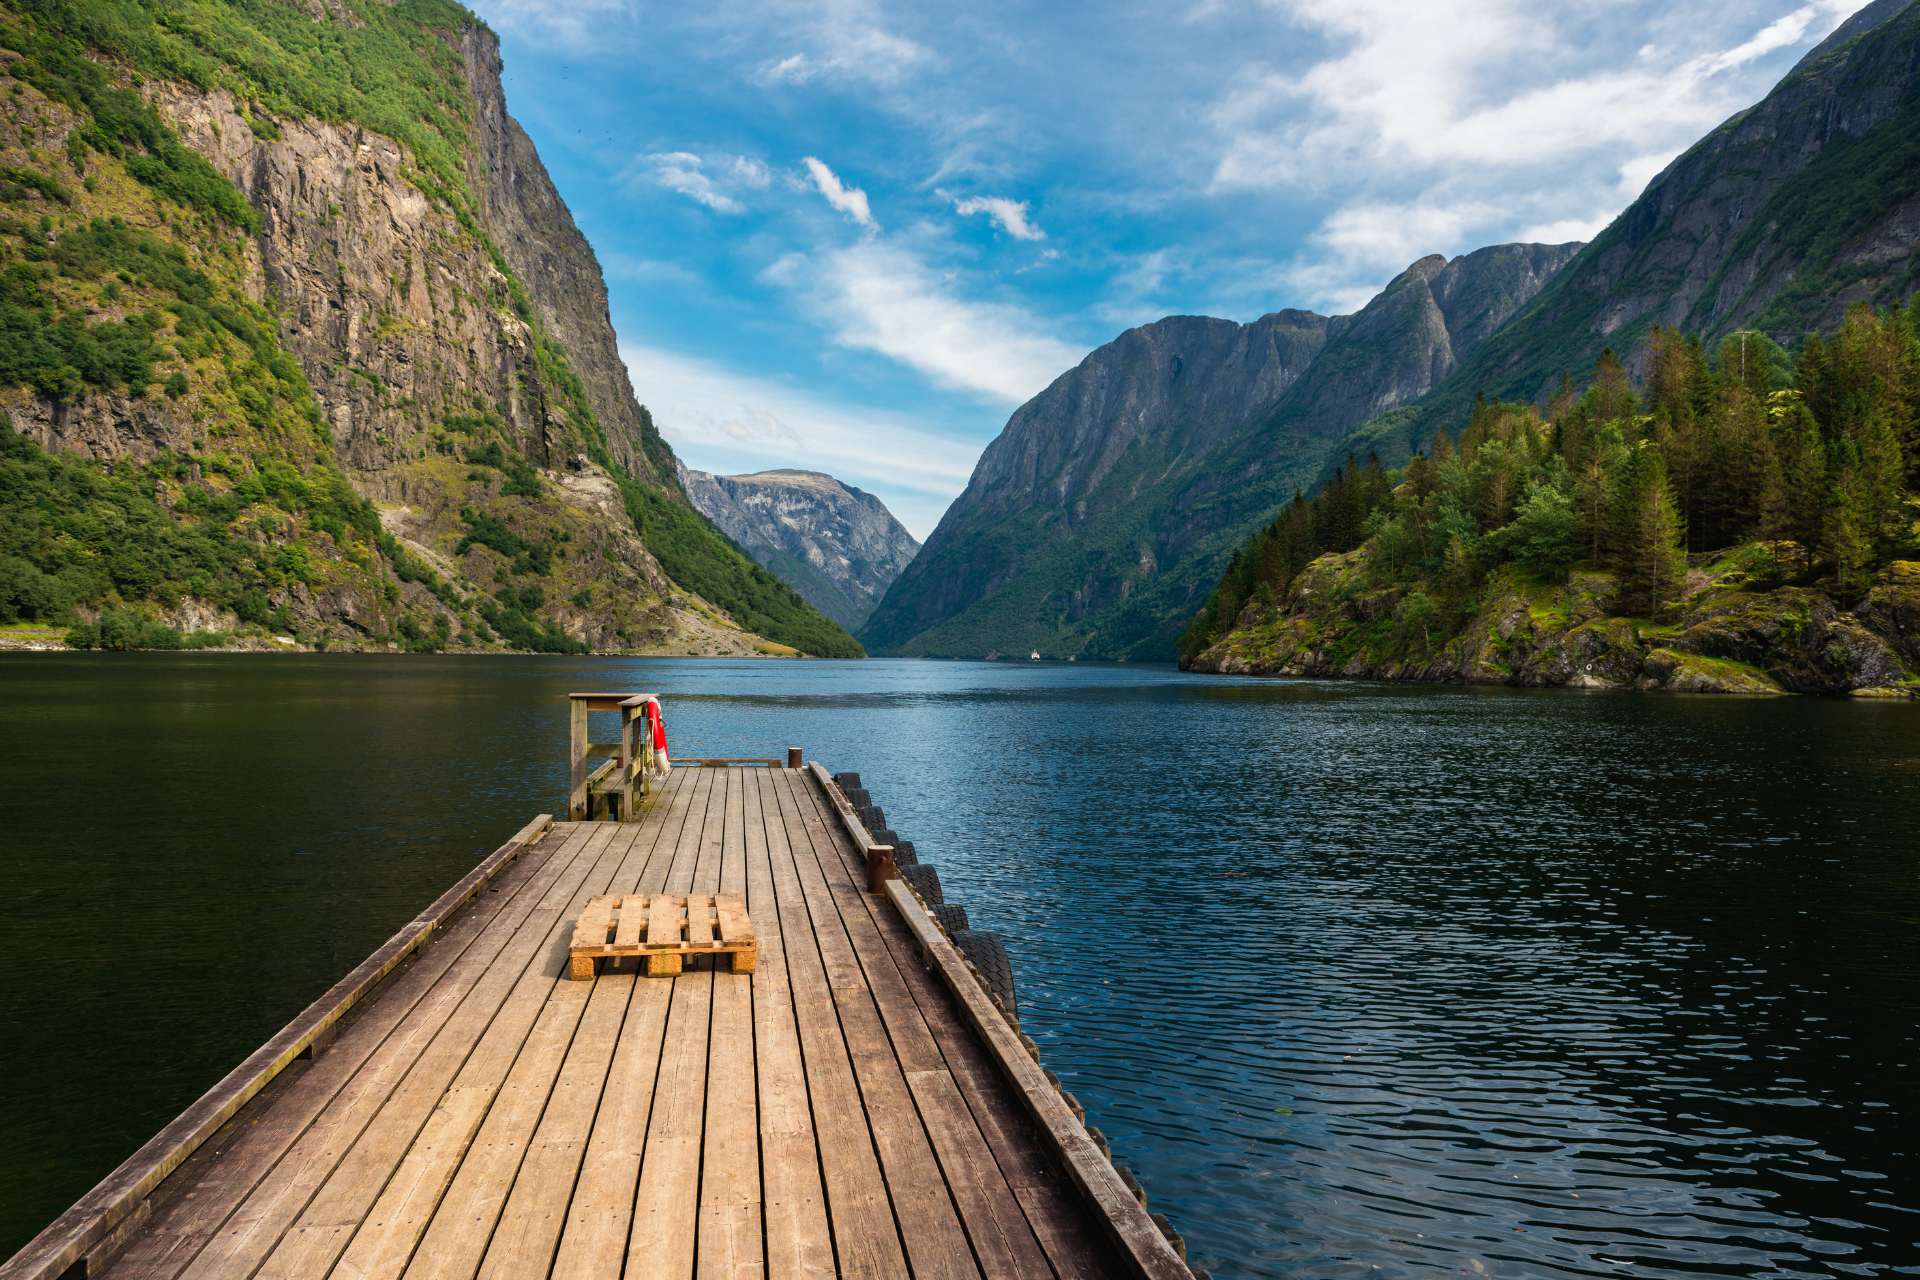 Pier at the narrow end of a fjord in Norway ©Getty Images